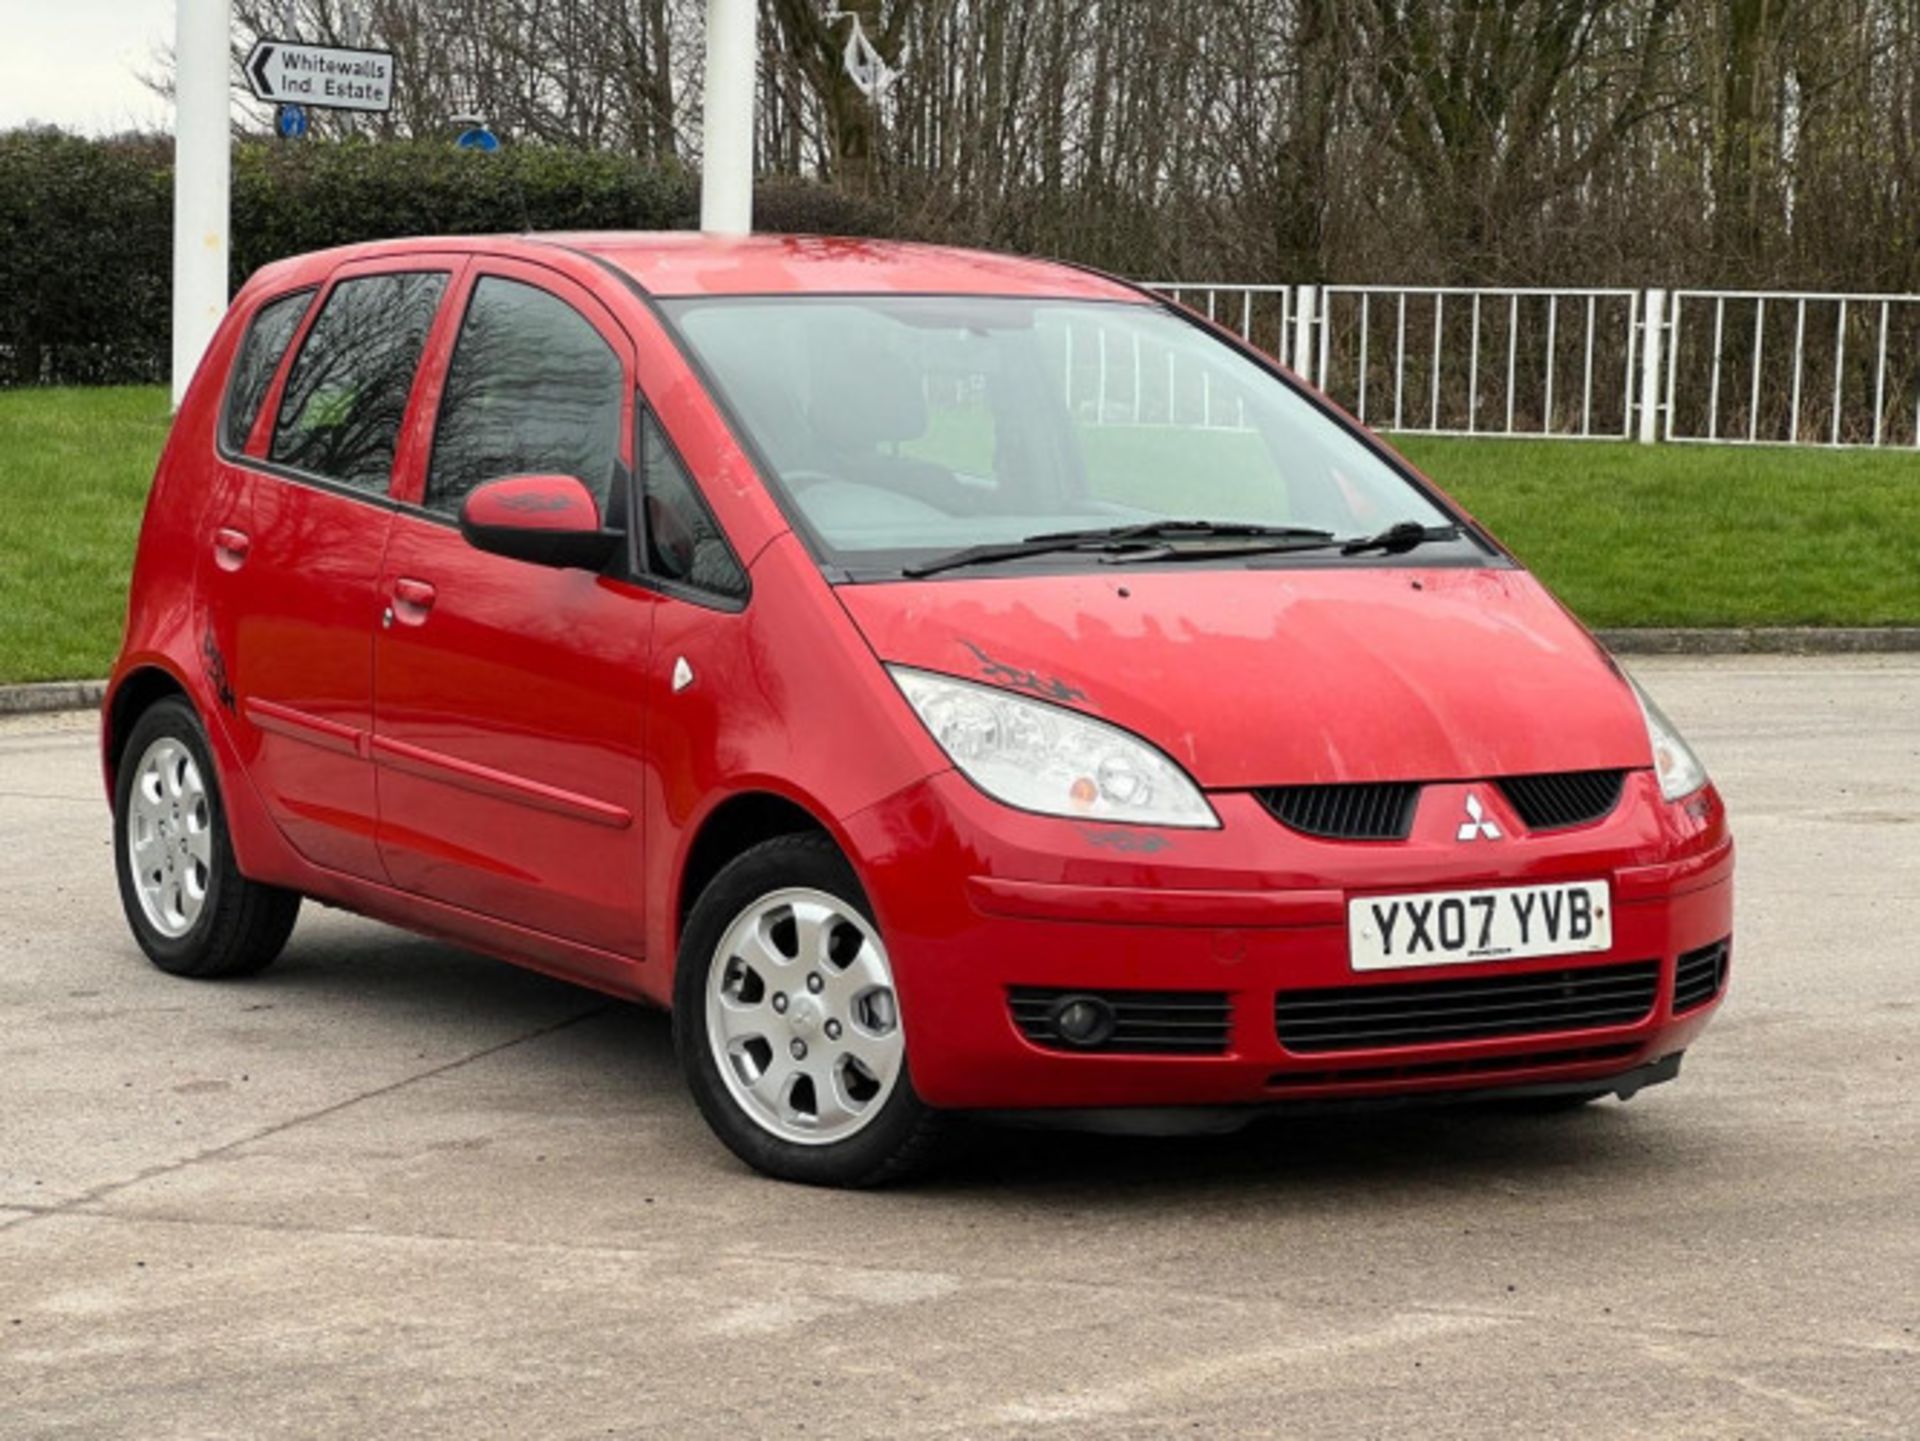 2007 MITSUBISHI COLT 1.5 DI-D DIESEL AUTOMATIC >>--NO VAT ON HAMMER--<< - Image 173 of 191